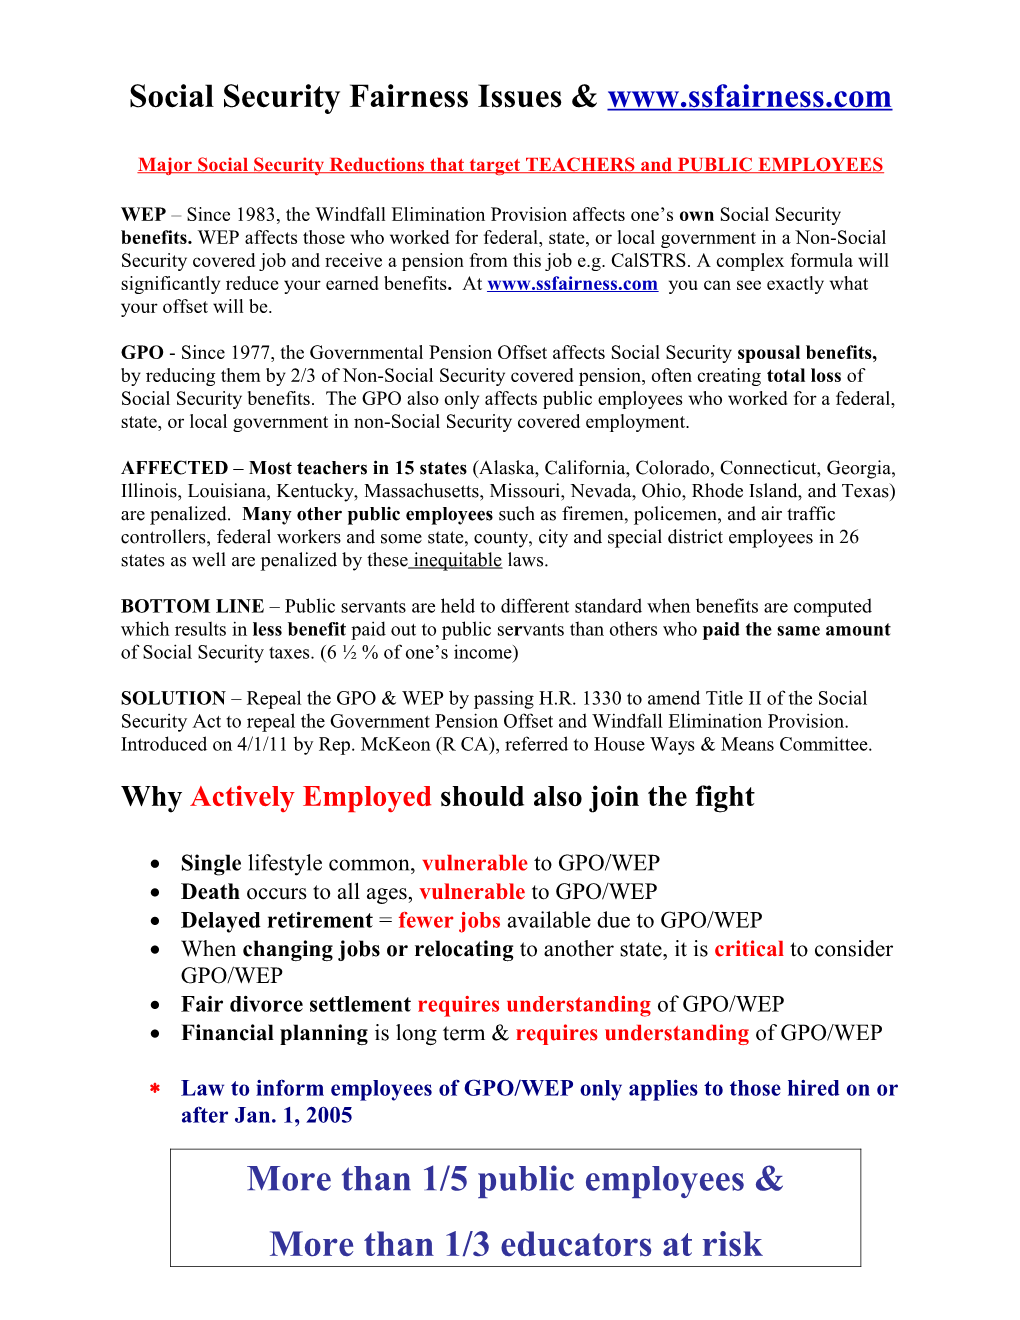 Social Security Fairness Issues & Www